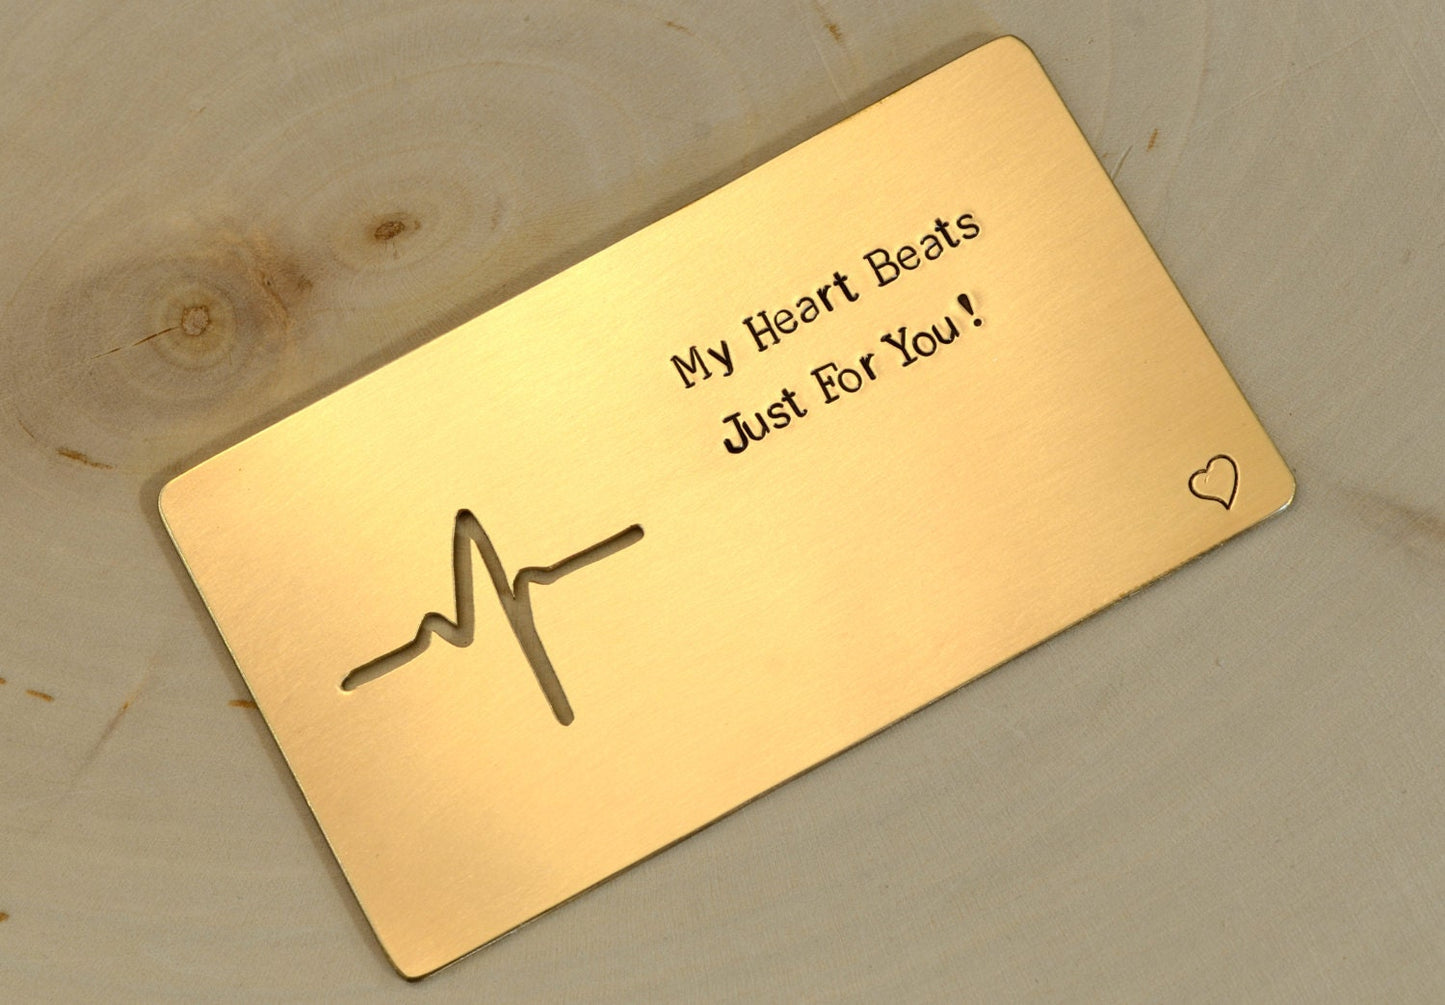 Bronze Wallet Insert engraved with My Heart Beats Just for You